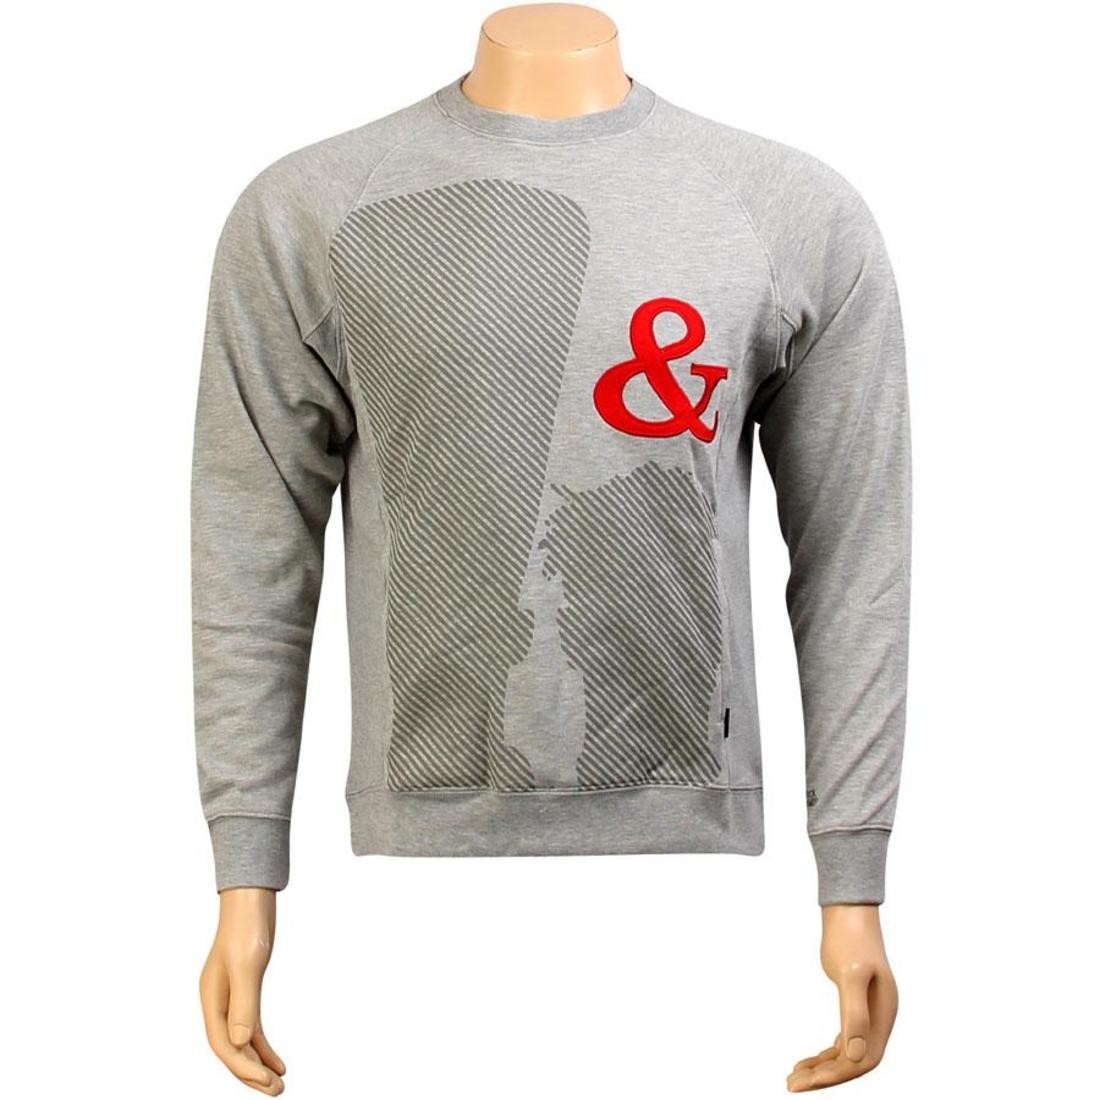 Rock Smith Kid And Play Sweater (heather grey)